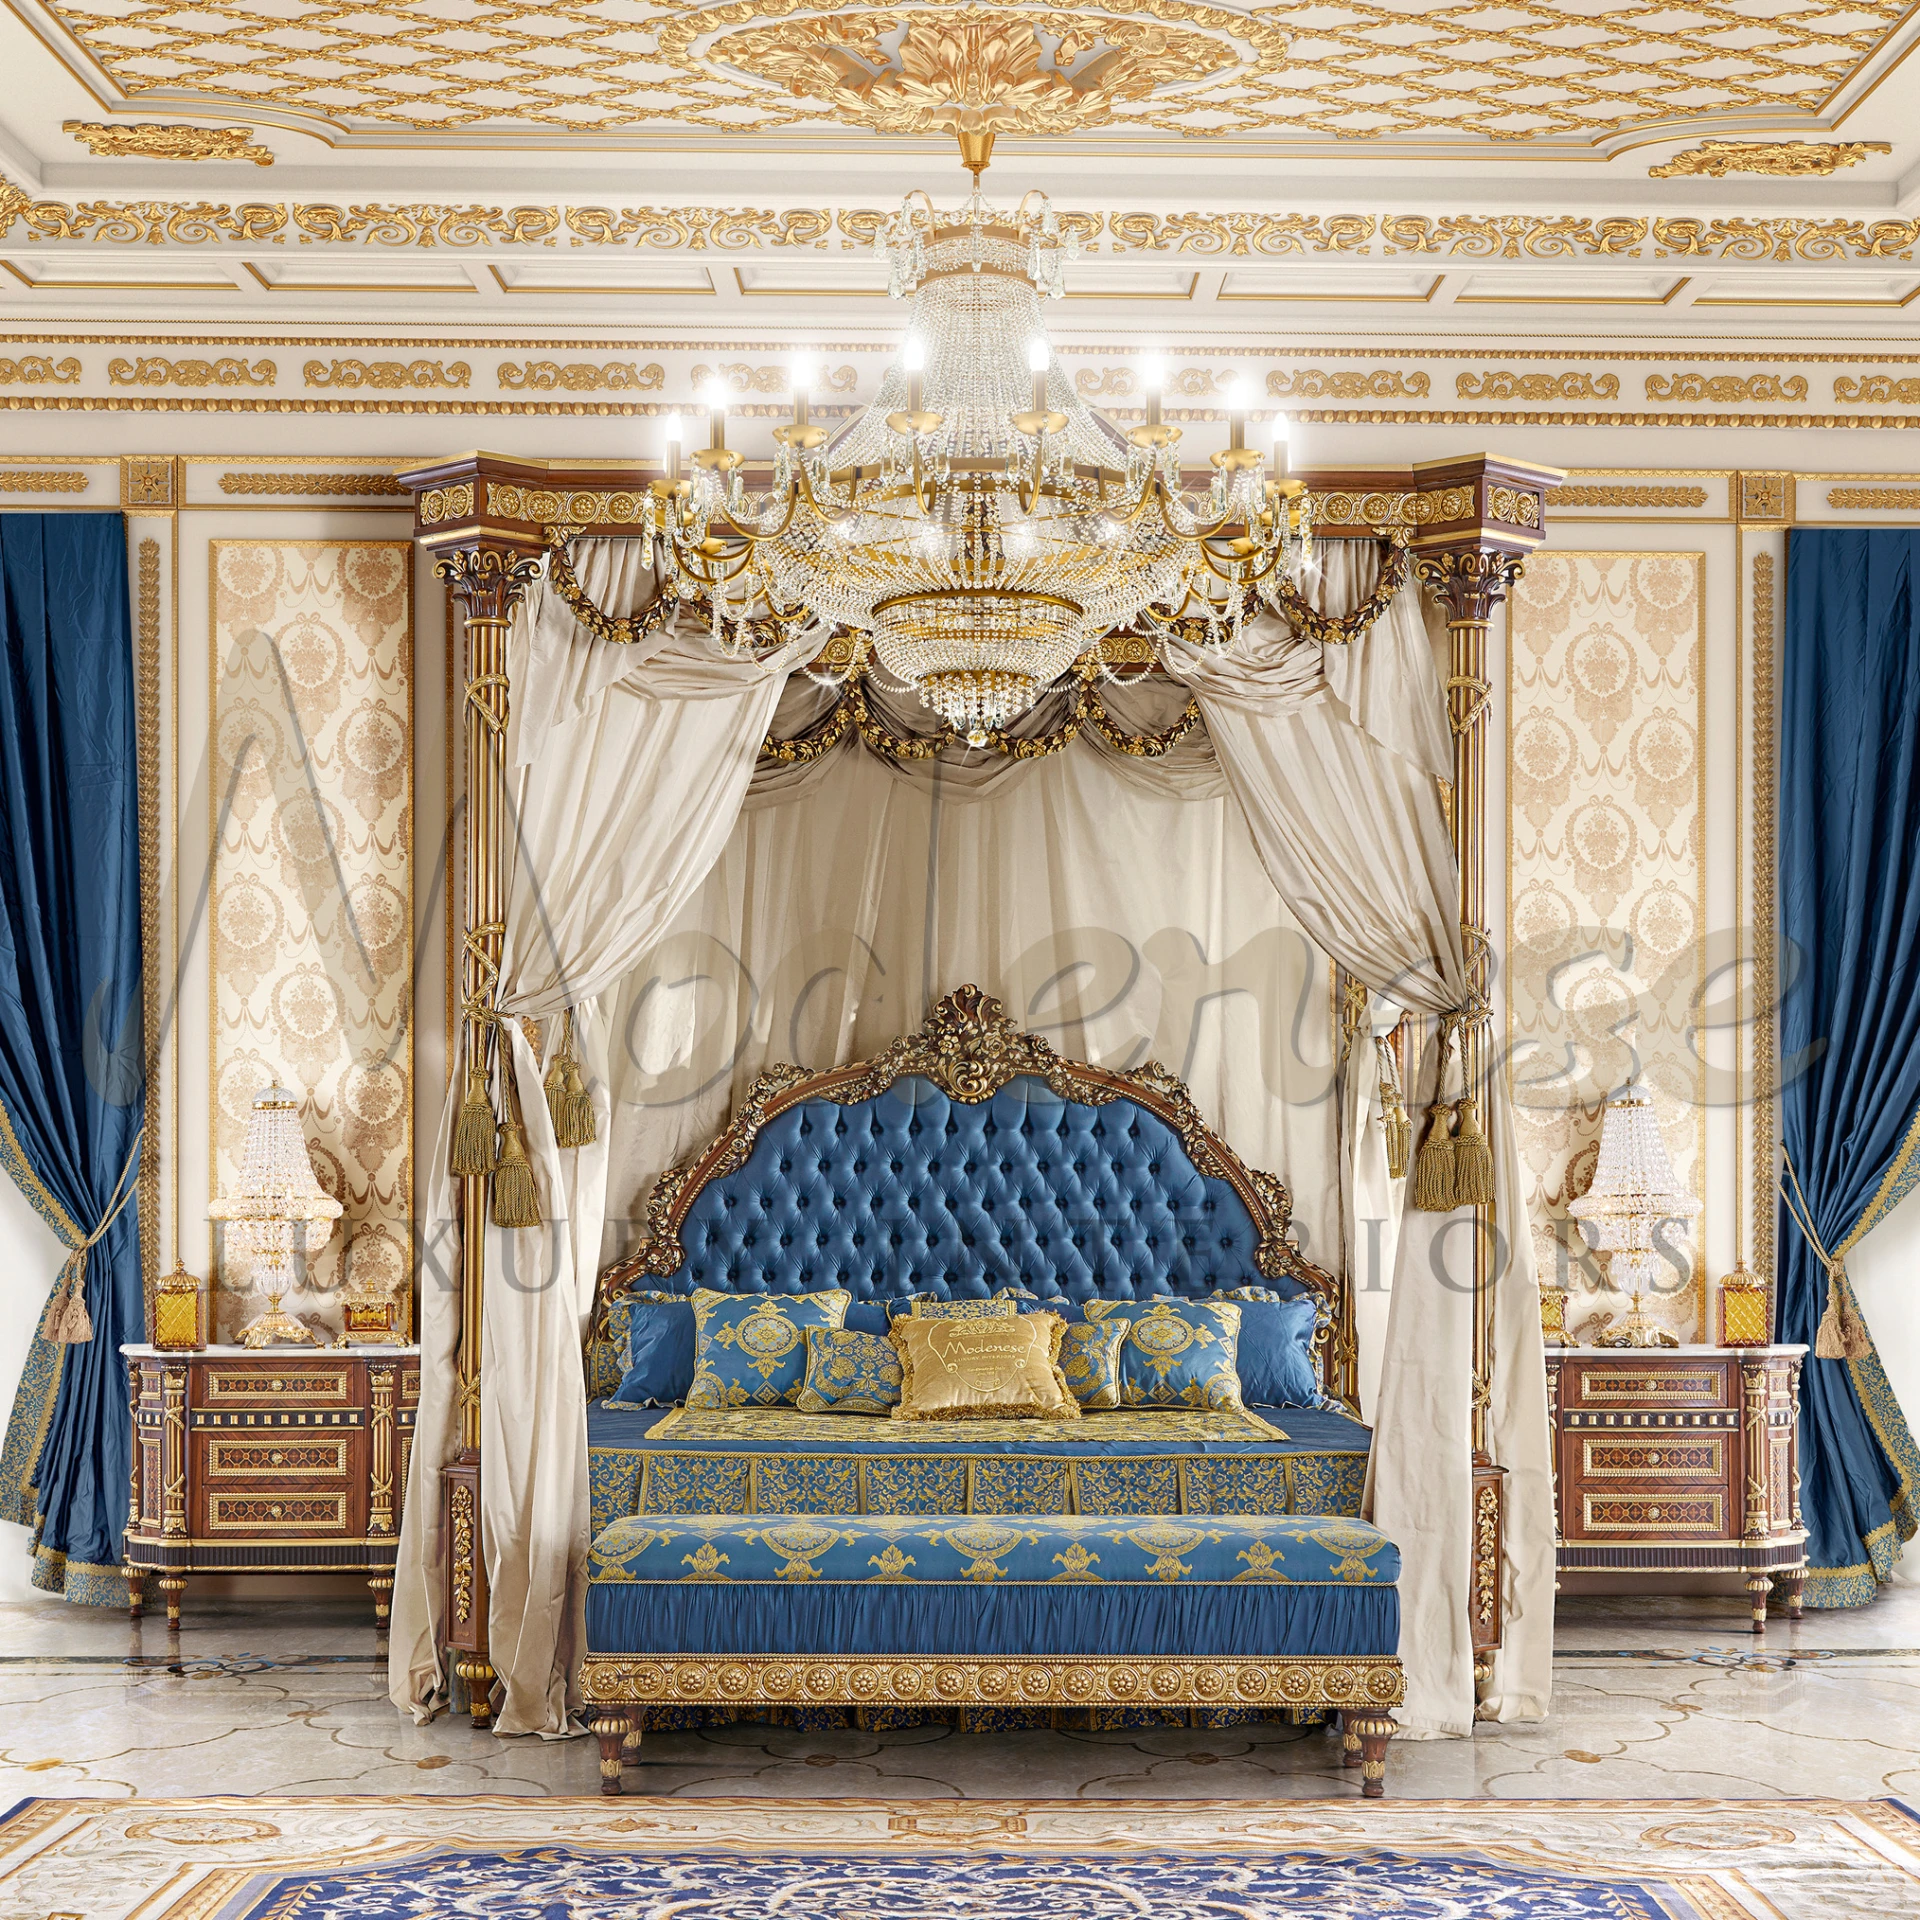 Embrace the luxury of royalty with our Royal Canopy Bed. Its exquisite craftsmanship and refined design redefine the art of sleeping in splendor.